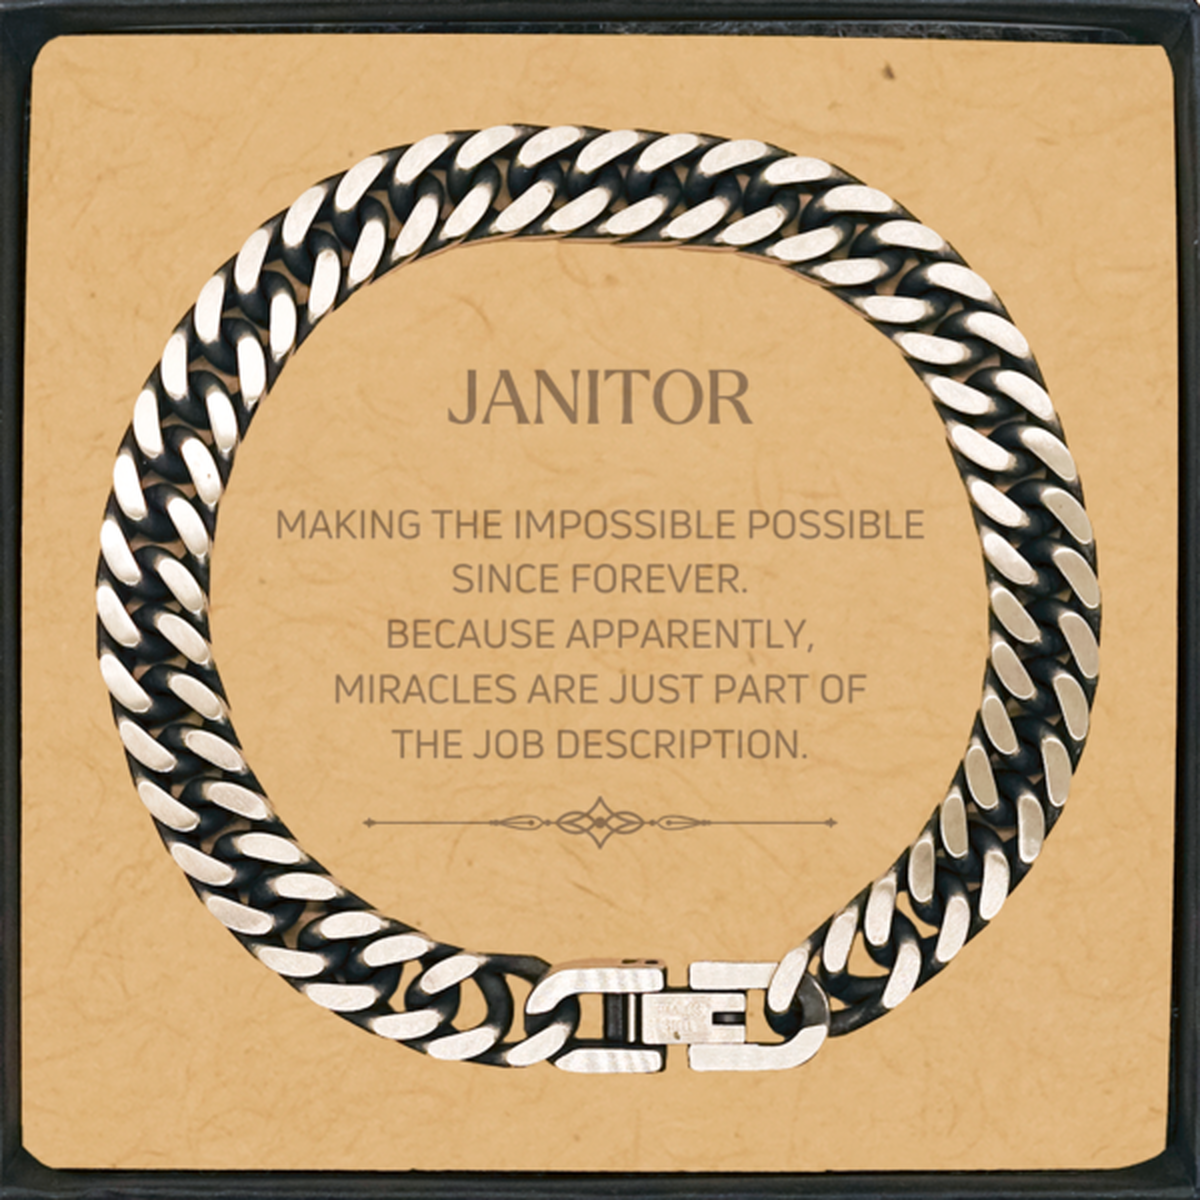 Funny Janitor Gifts, Miracles are just part of the job description, Inspirational Birthday Cuban Link Chain Bracelet For Janitor, Men, Women, Coworkers, Friends, Boss